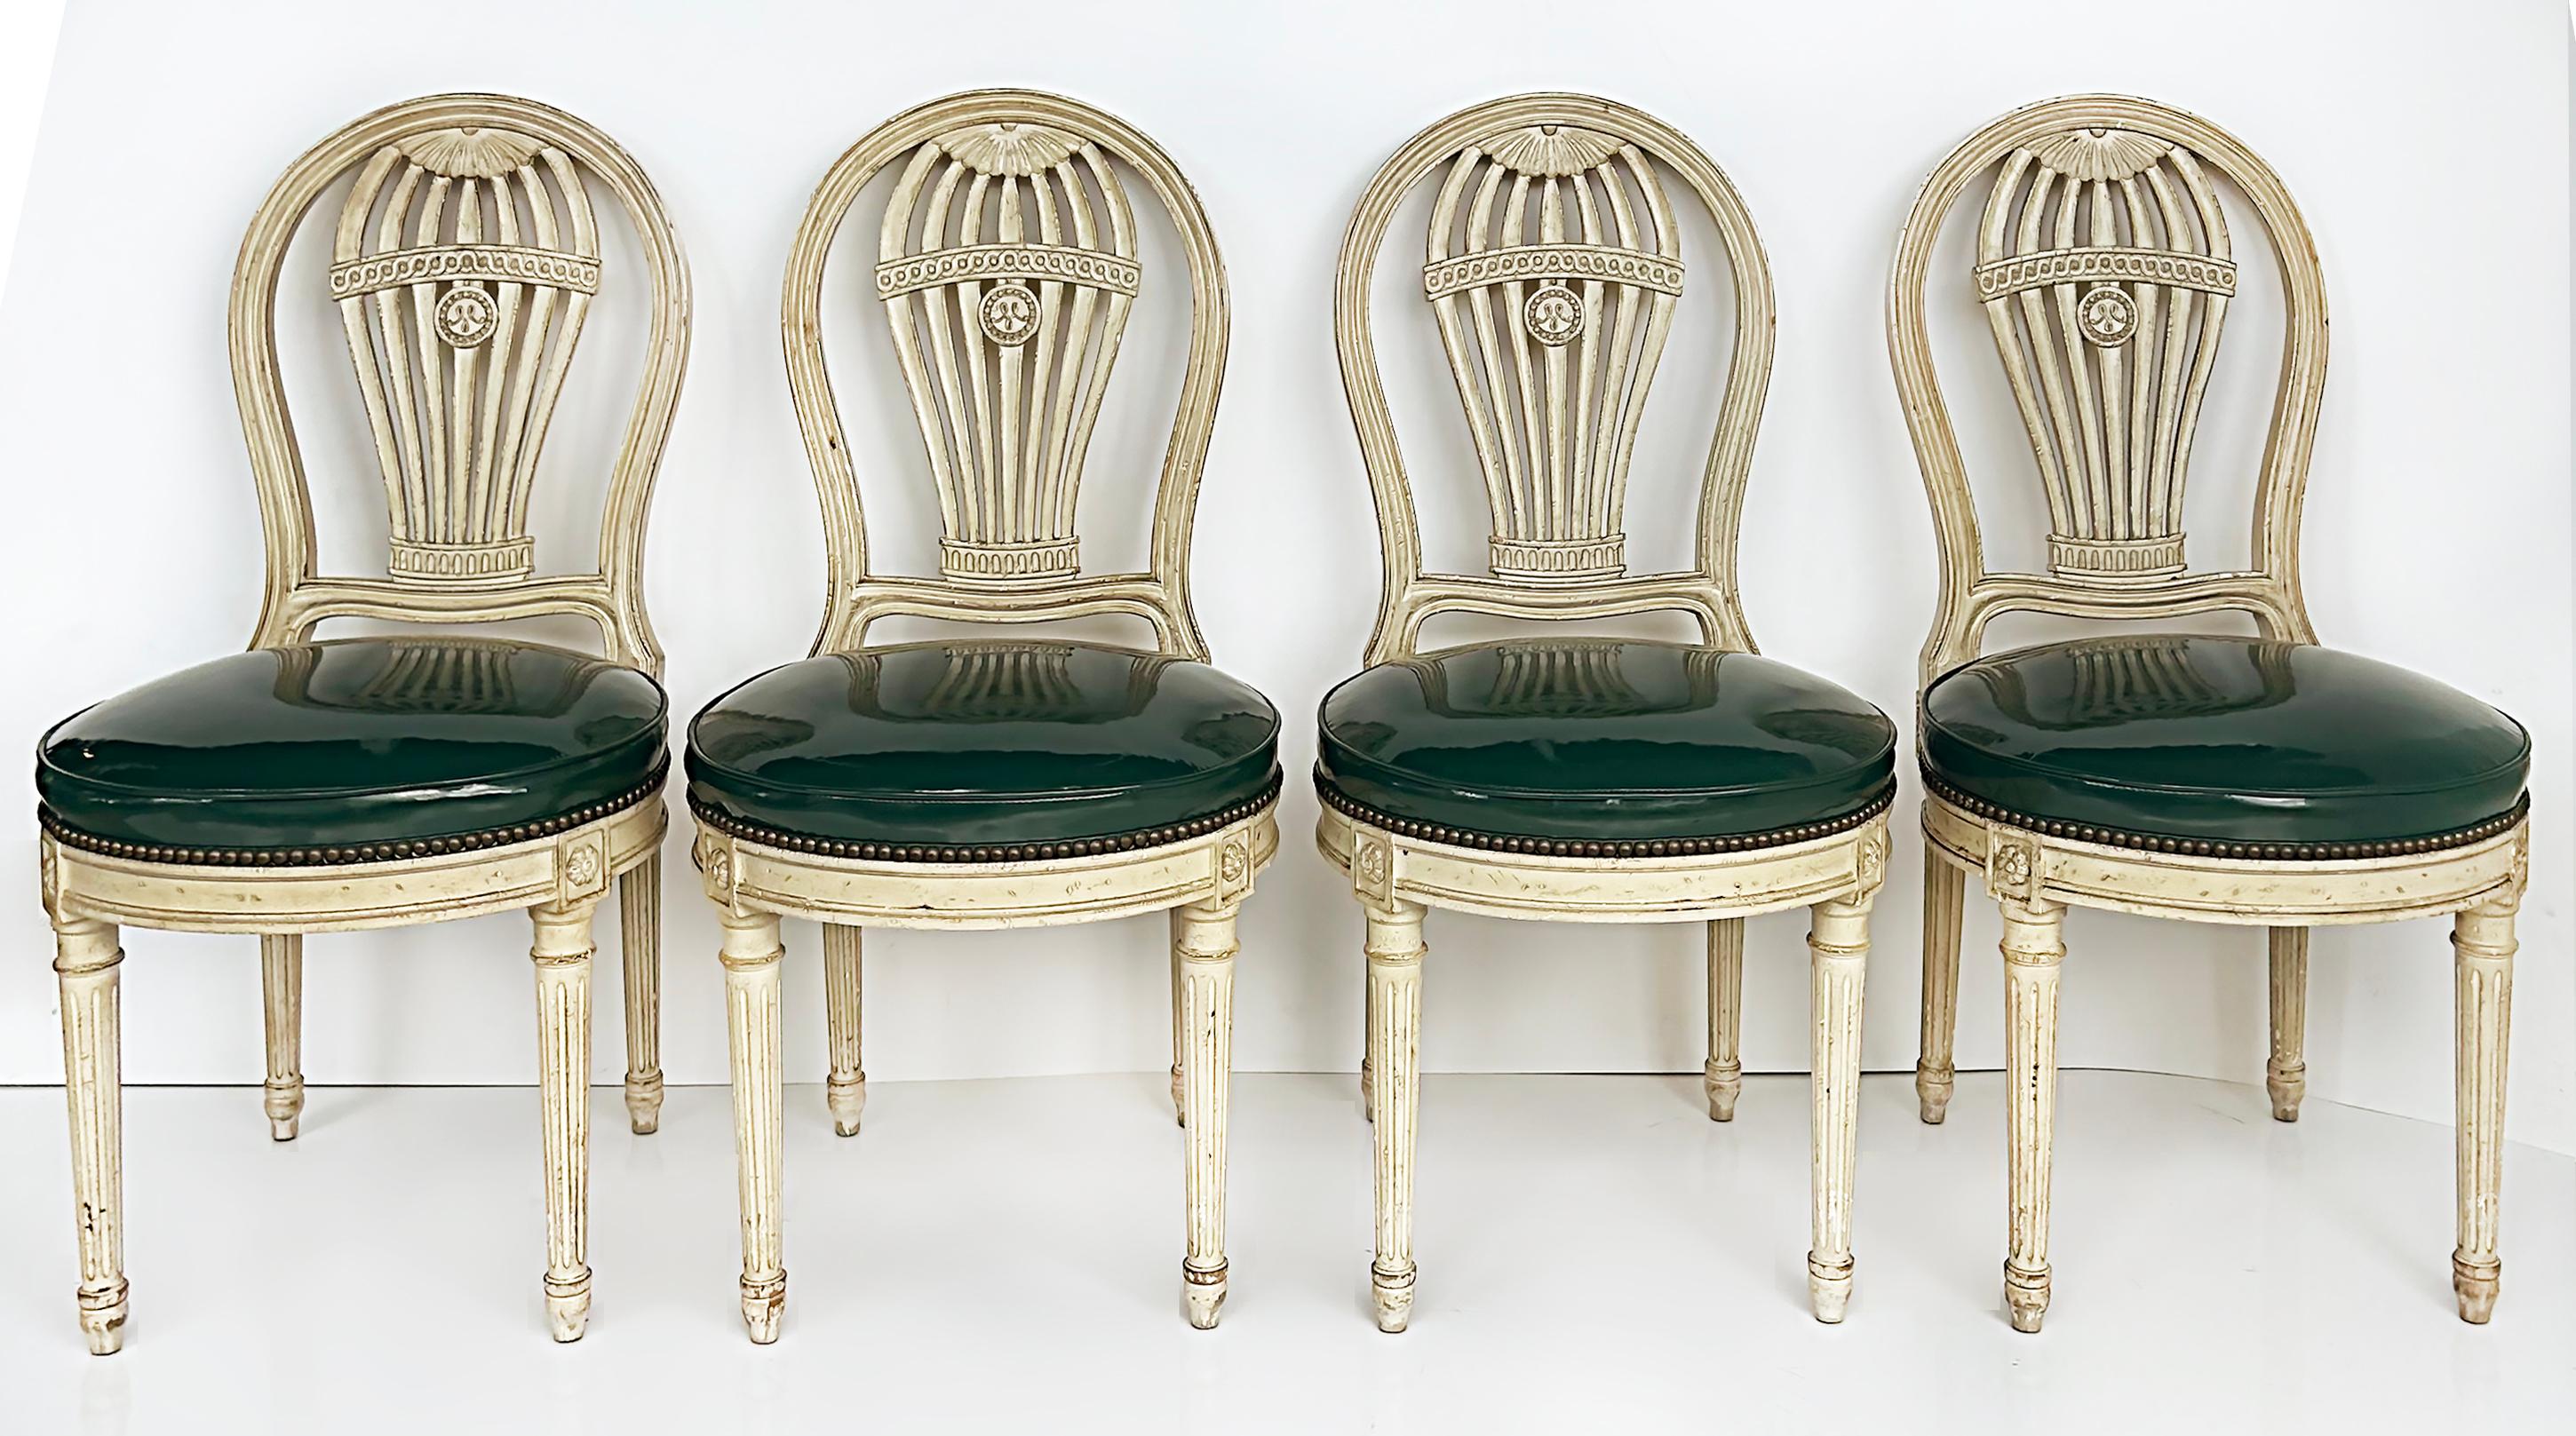 Vintage Painted Balloon back chairs, Maison Jansen Attributed, Patent Faux Seats

Offered for sale is a set of four (4) painted balloon back dining chairs with deep green faux patent leather Naugahyde upholstered seats. The chair seats have brass